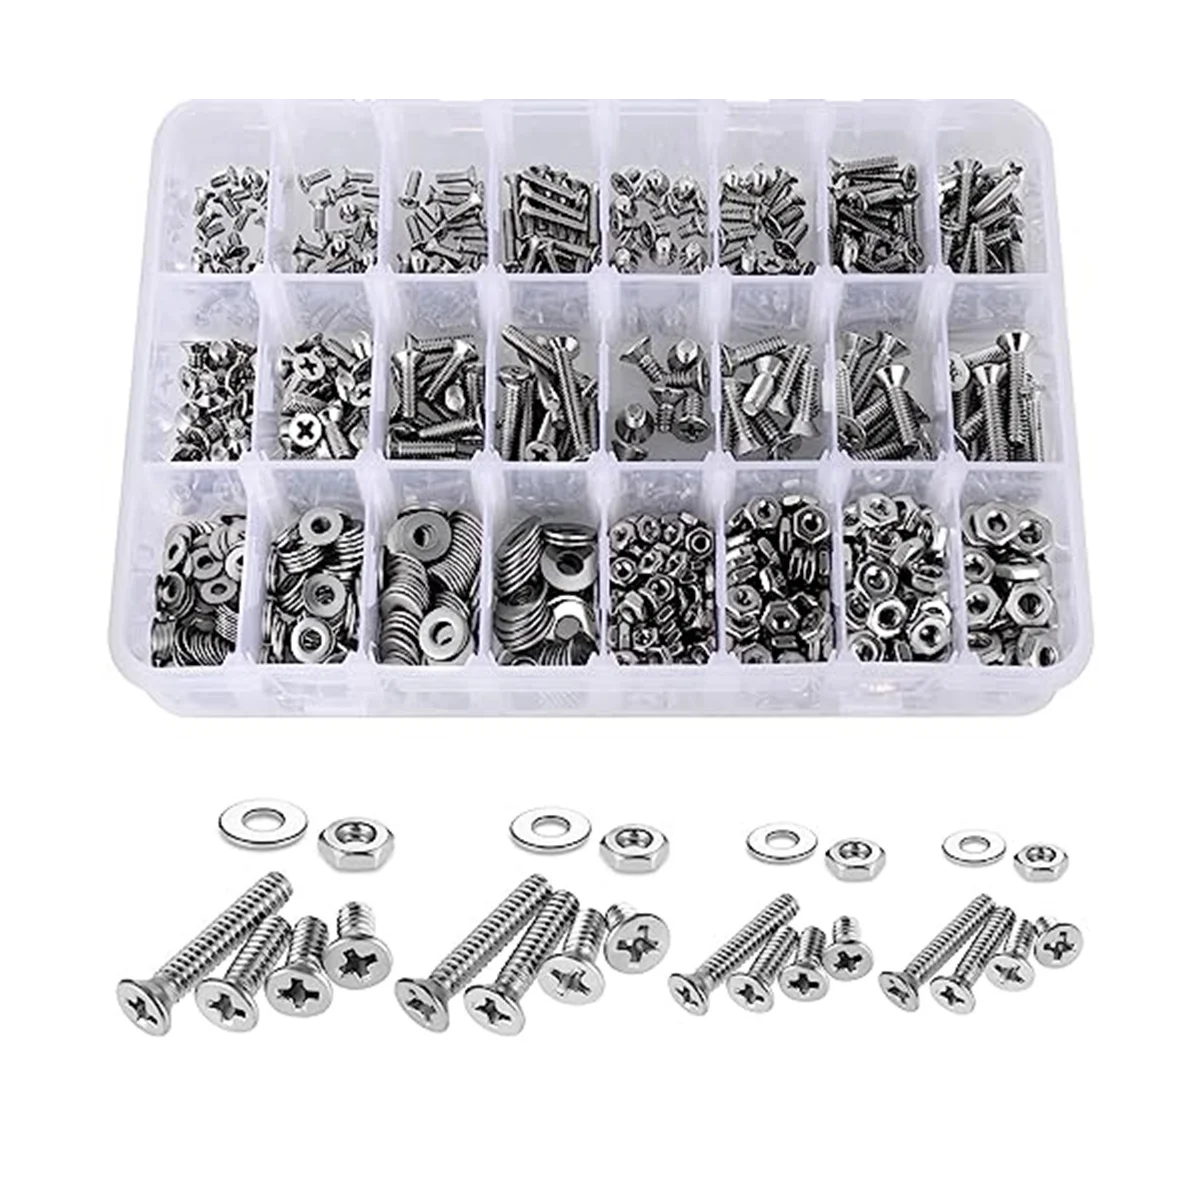 

900PCS Nuts and Bolts Assortment Kit for Home Projects - Stainless Steel Machine Screws Assortment Kit